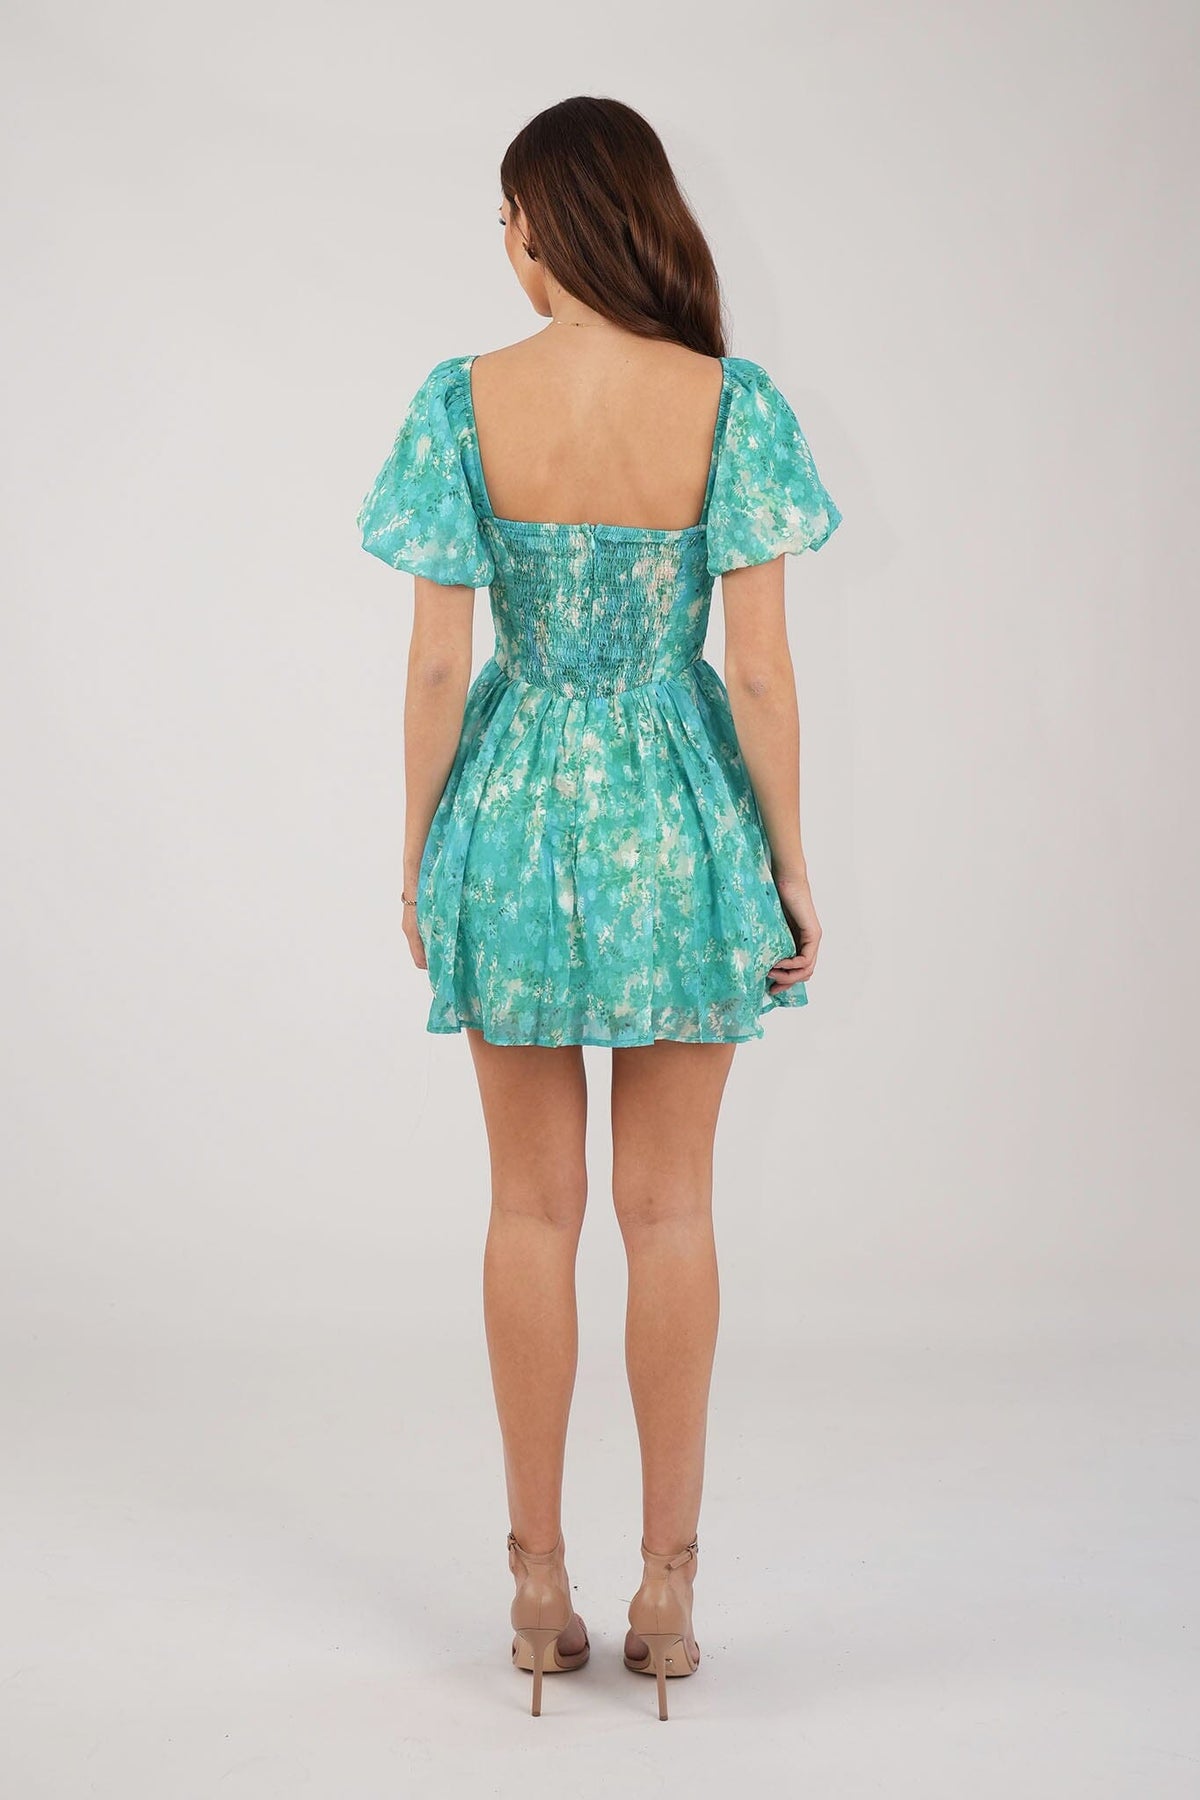 Shirred Stretch Back of Green Floral Mini Dress with Sweetheart Neckline and Puff Sleeves